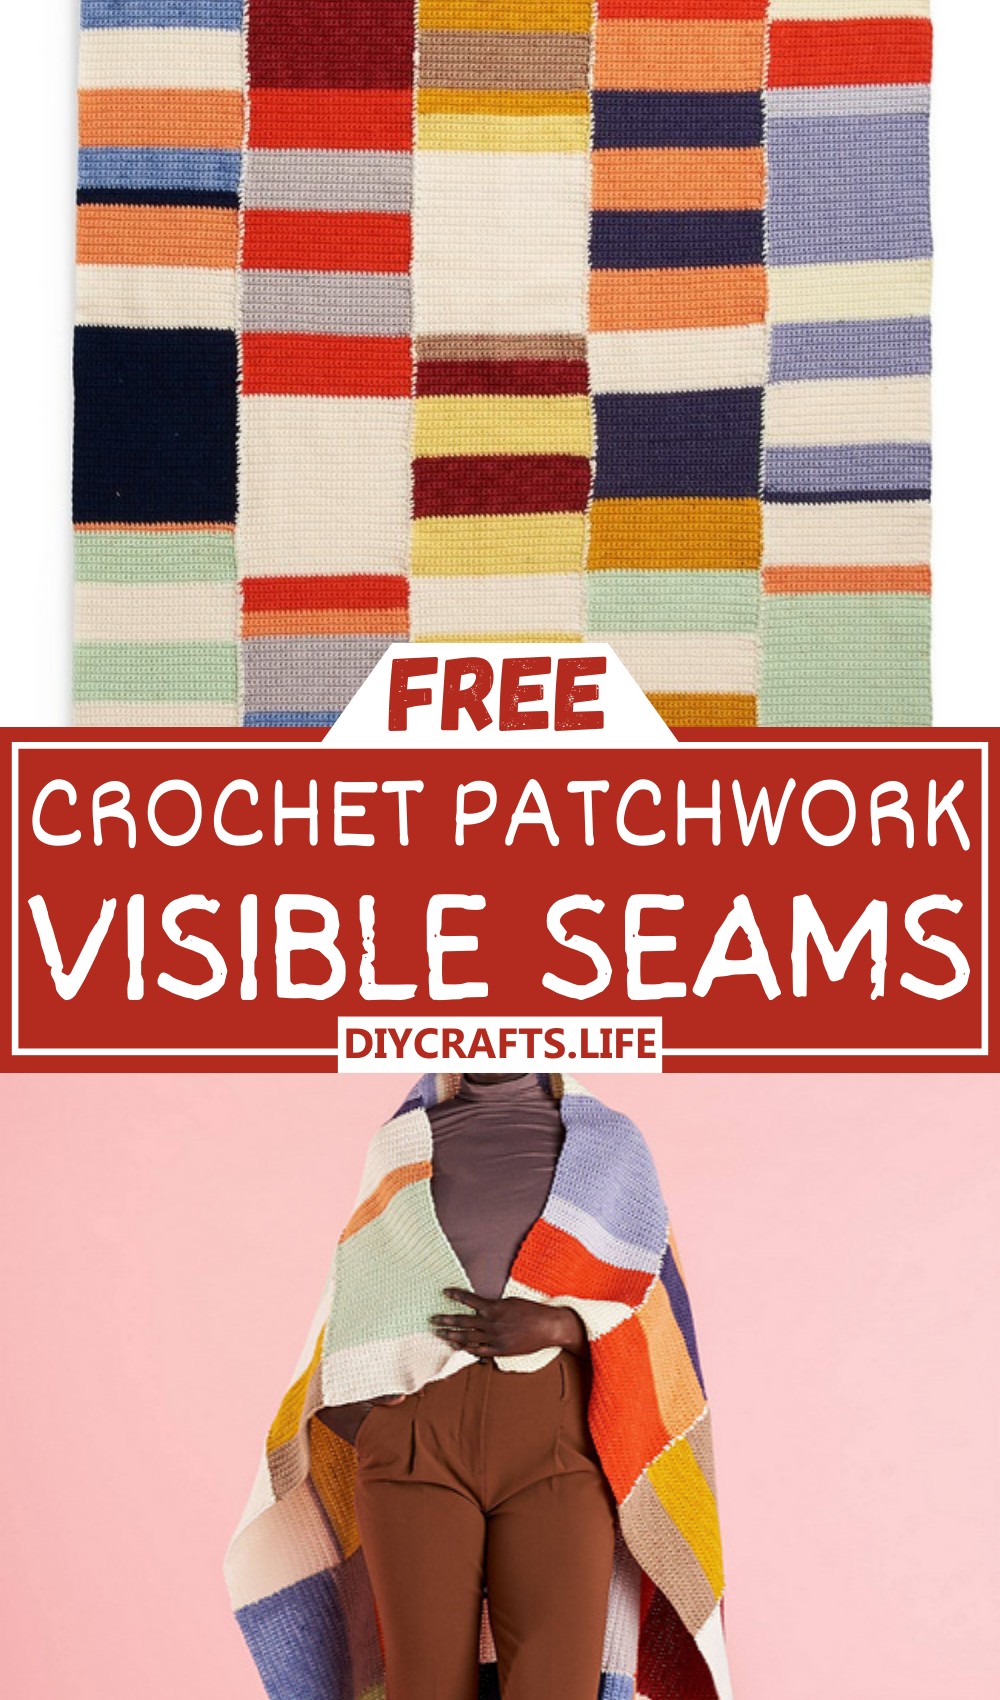 Crochet Patchwork With Visible Seams